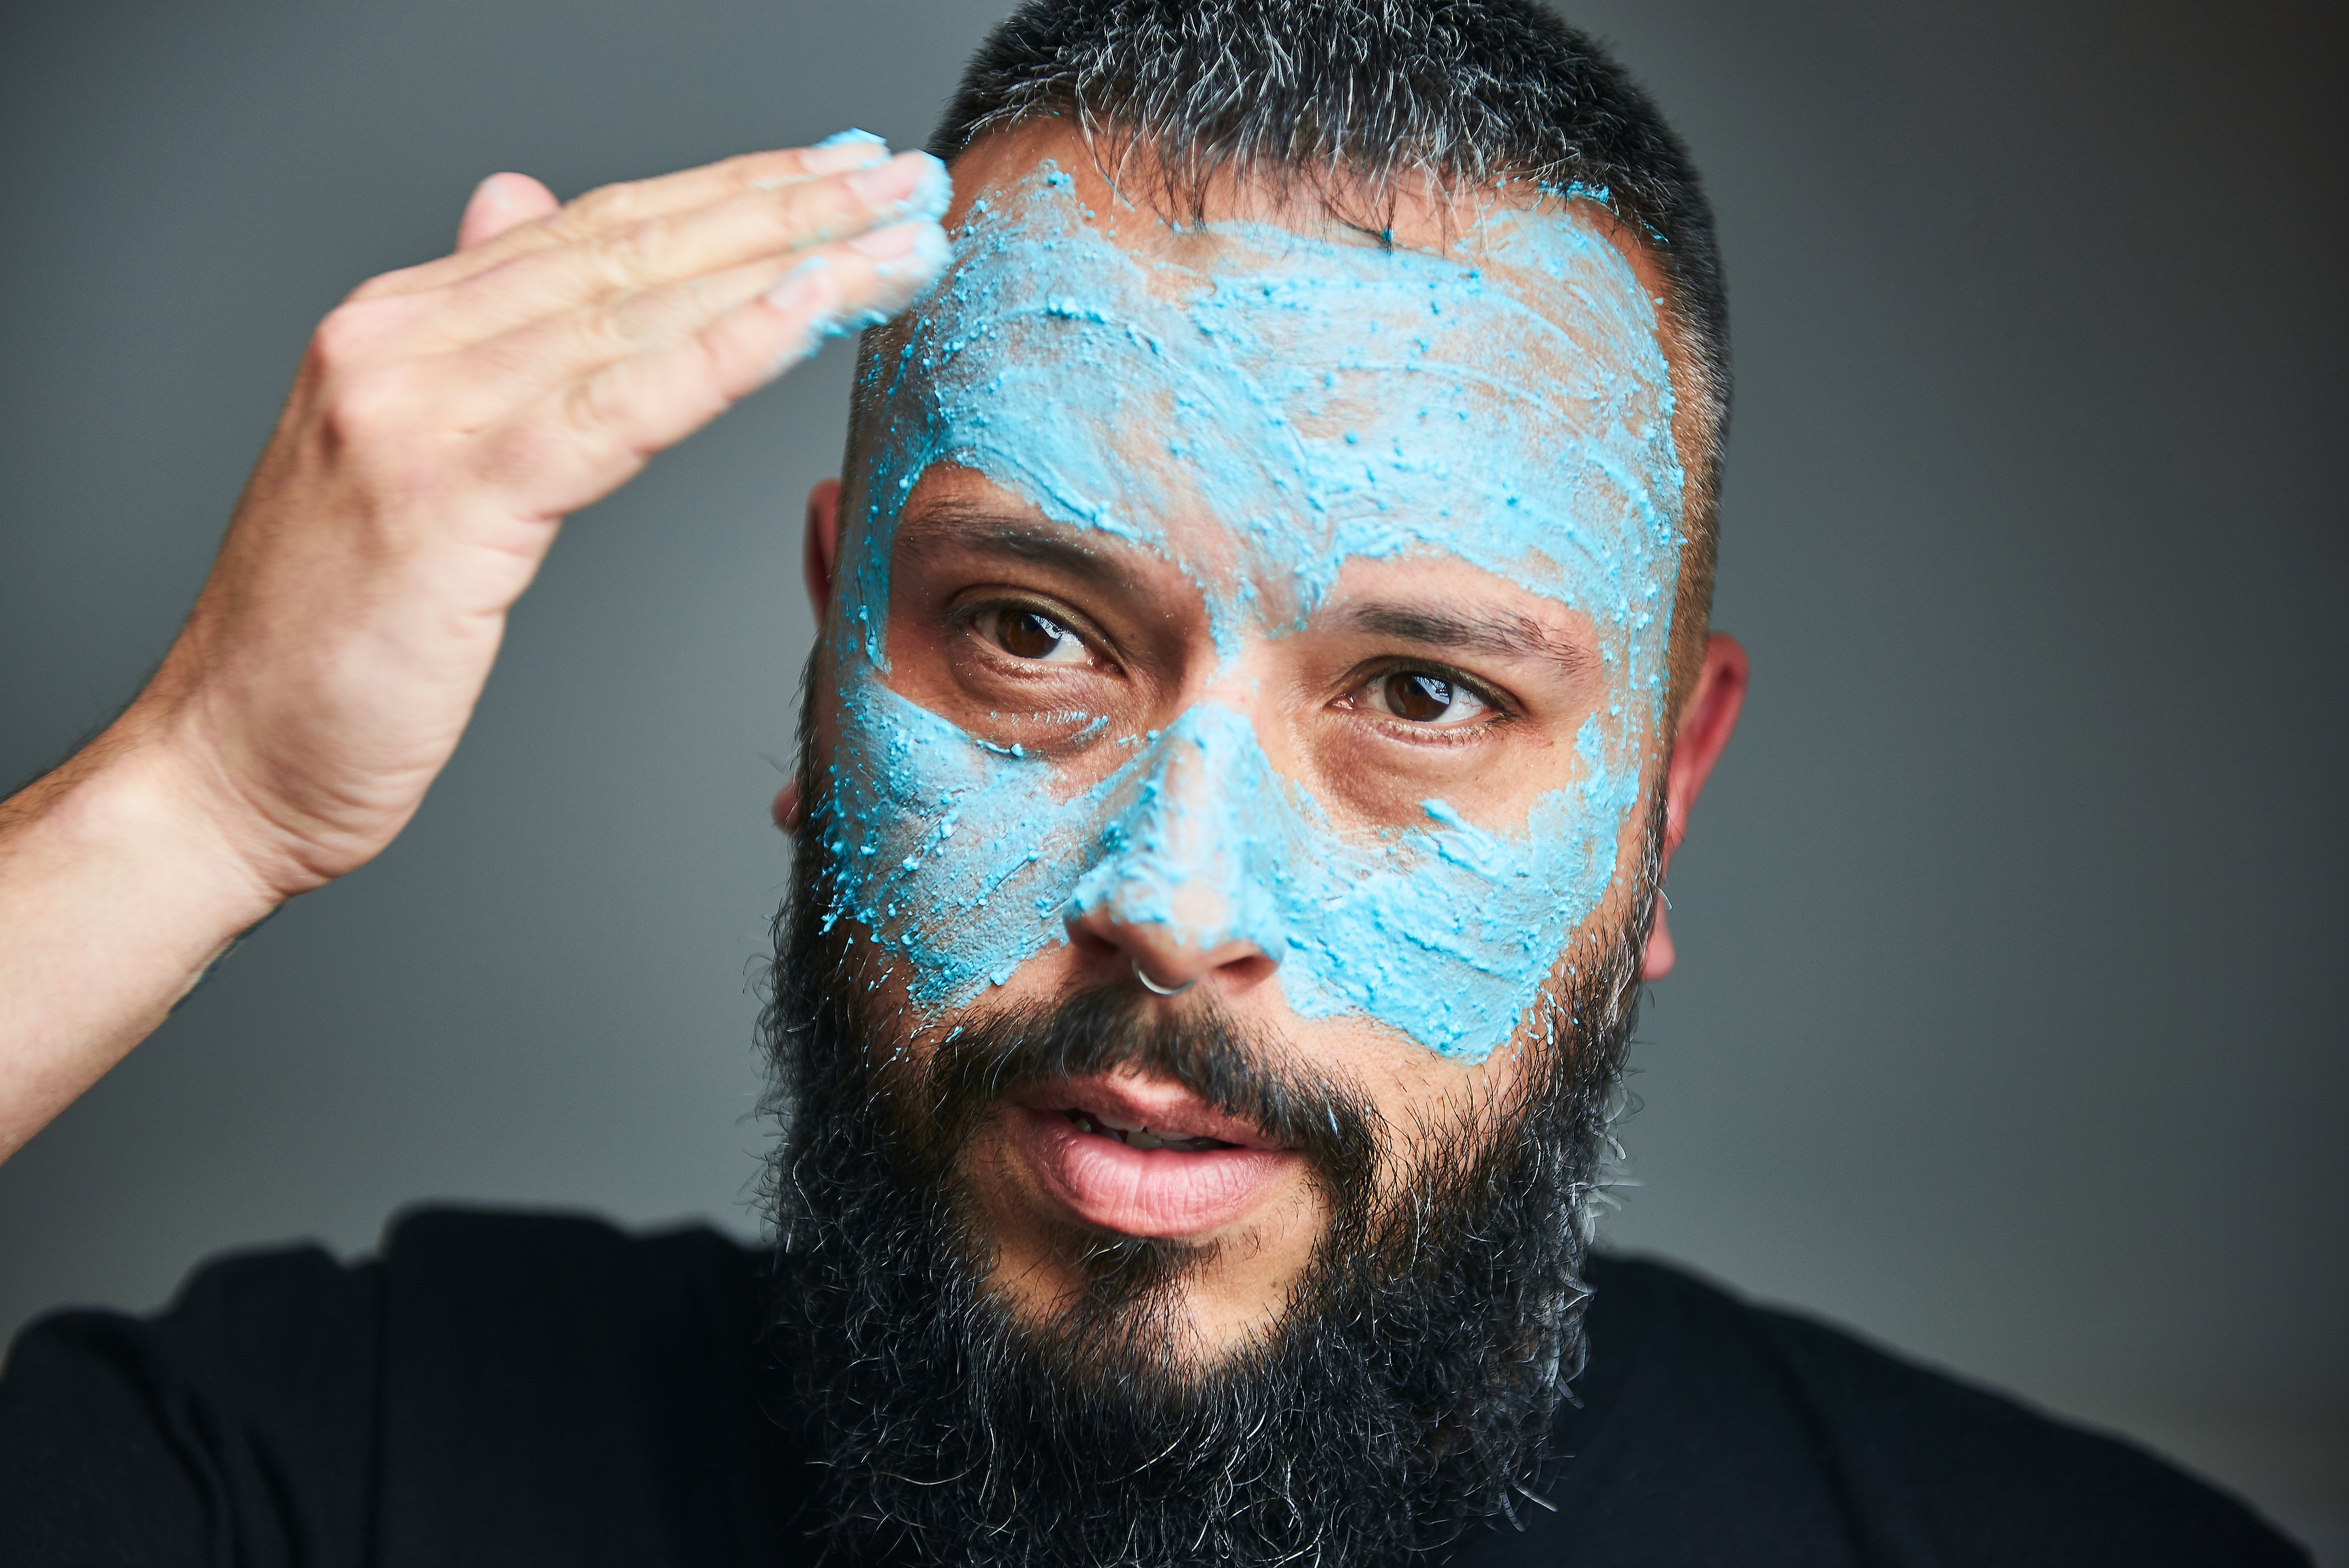 The bearded model gently applies the fresh, aqua-blue face mask to their face with their fingertips, on a grey background.